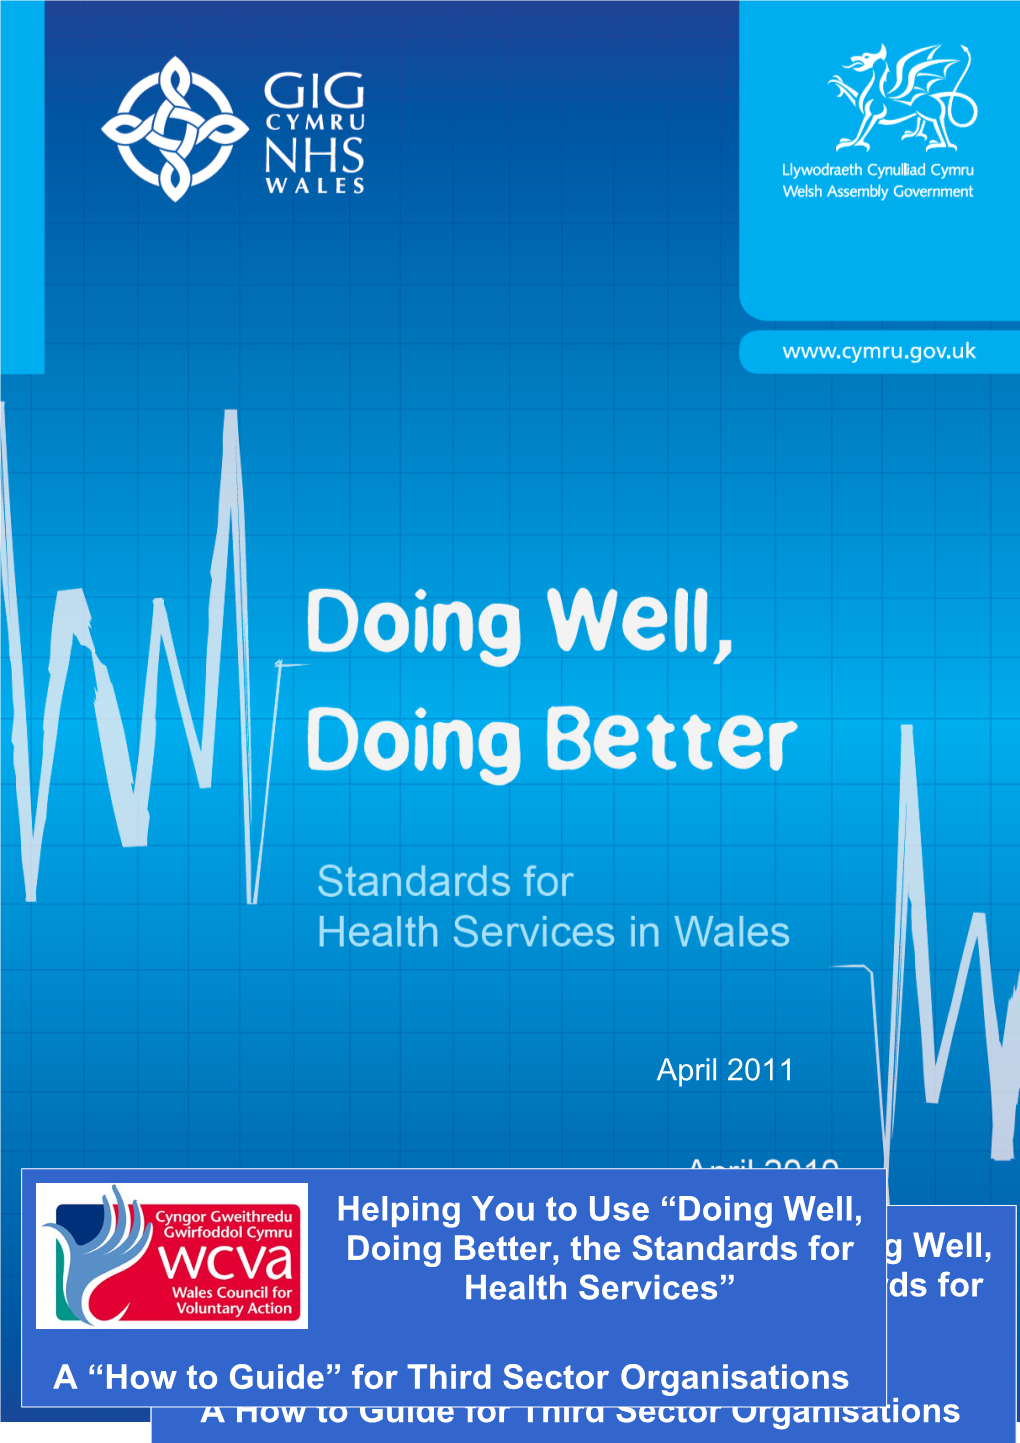 Helping You to Use the Standards for Health Services: a Toolkit for Third Sector Organisations